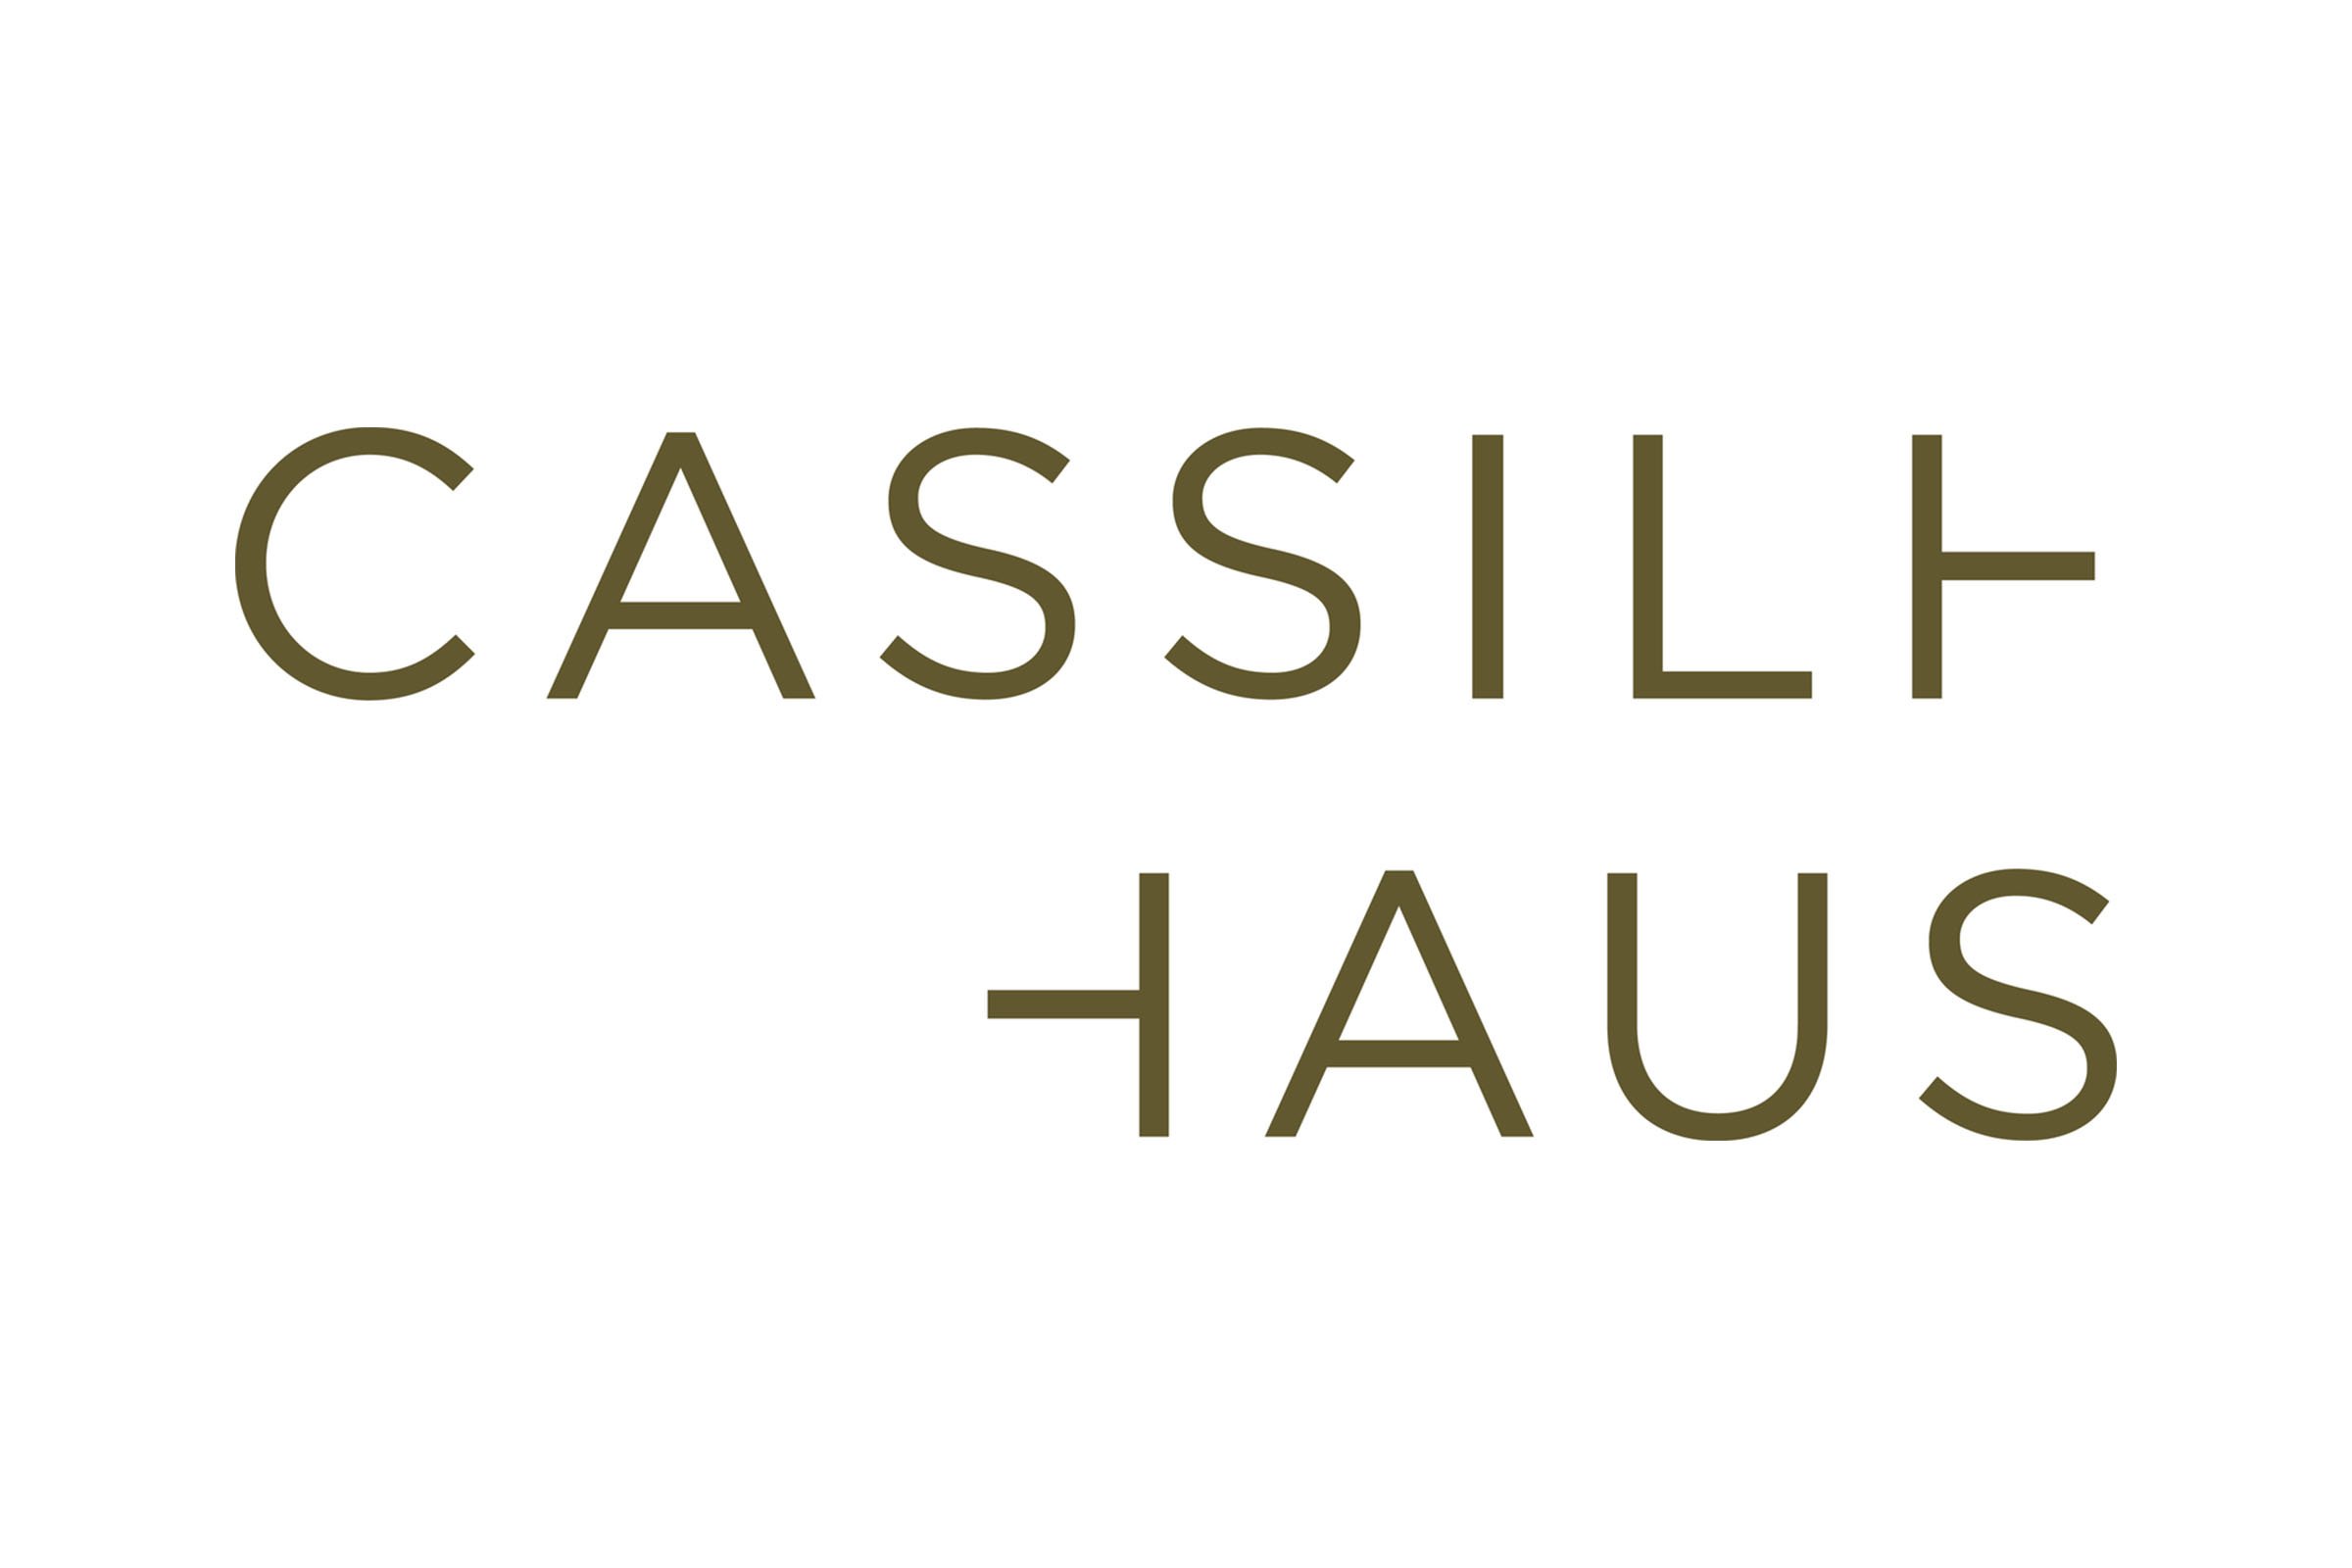 Works_I_Remember_Support_Cassilhaus.jpg